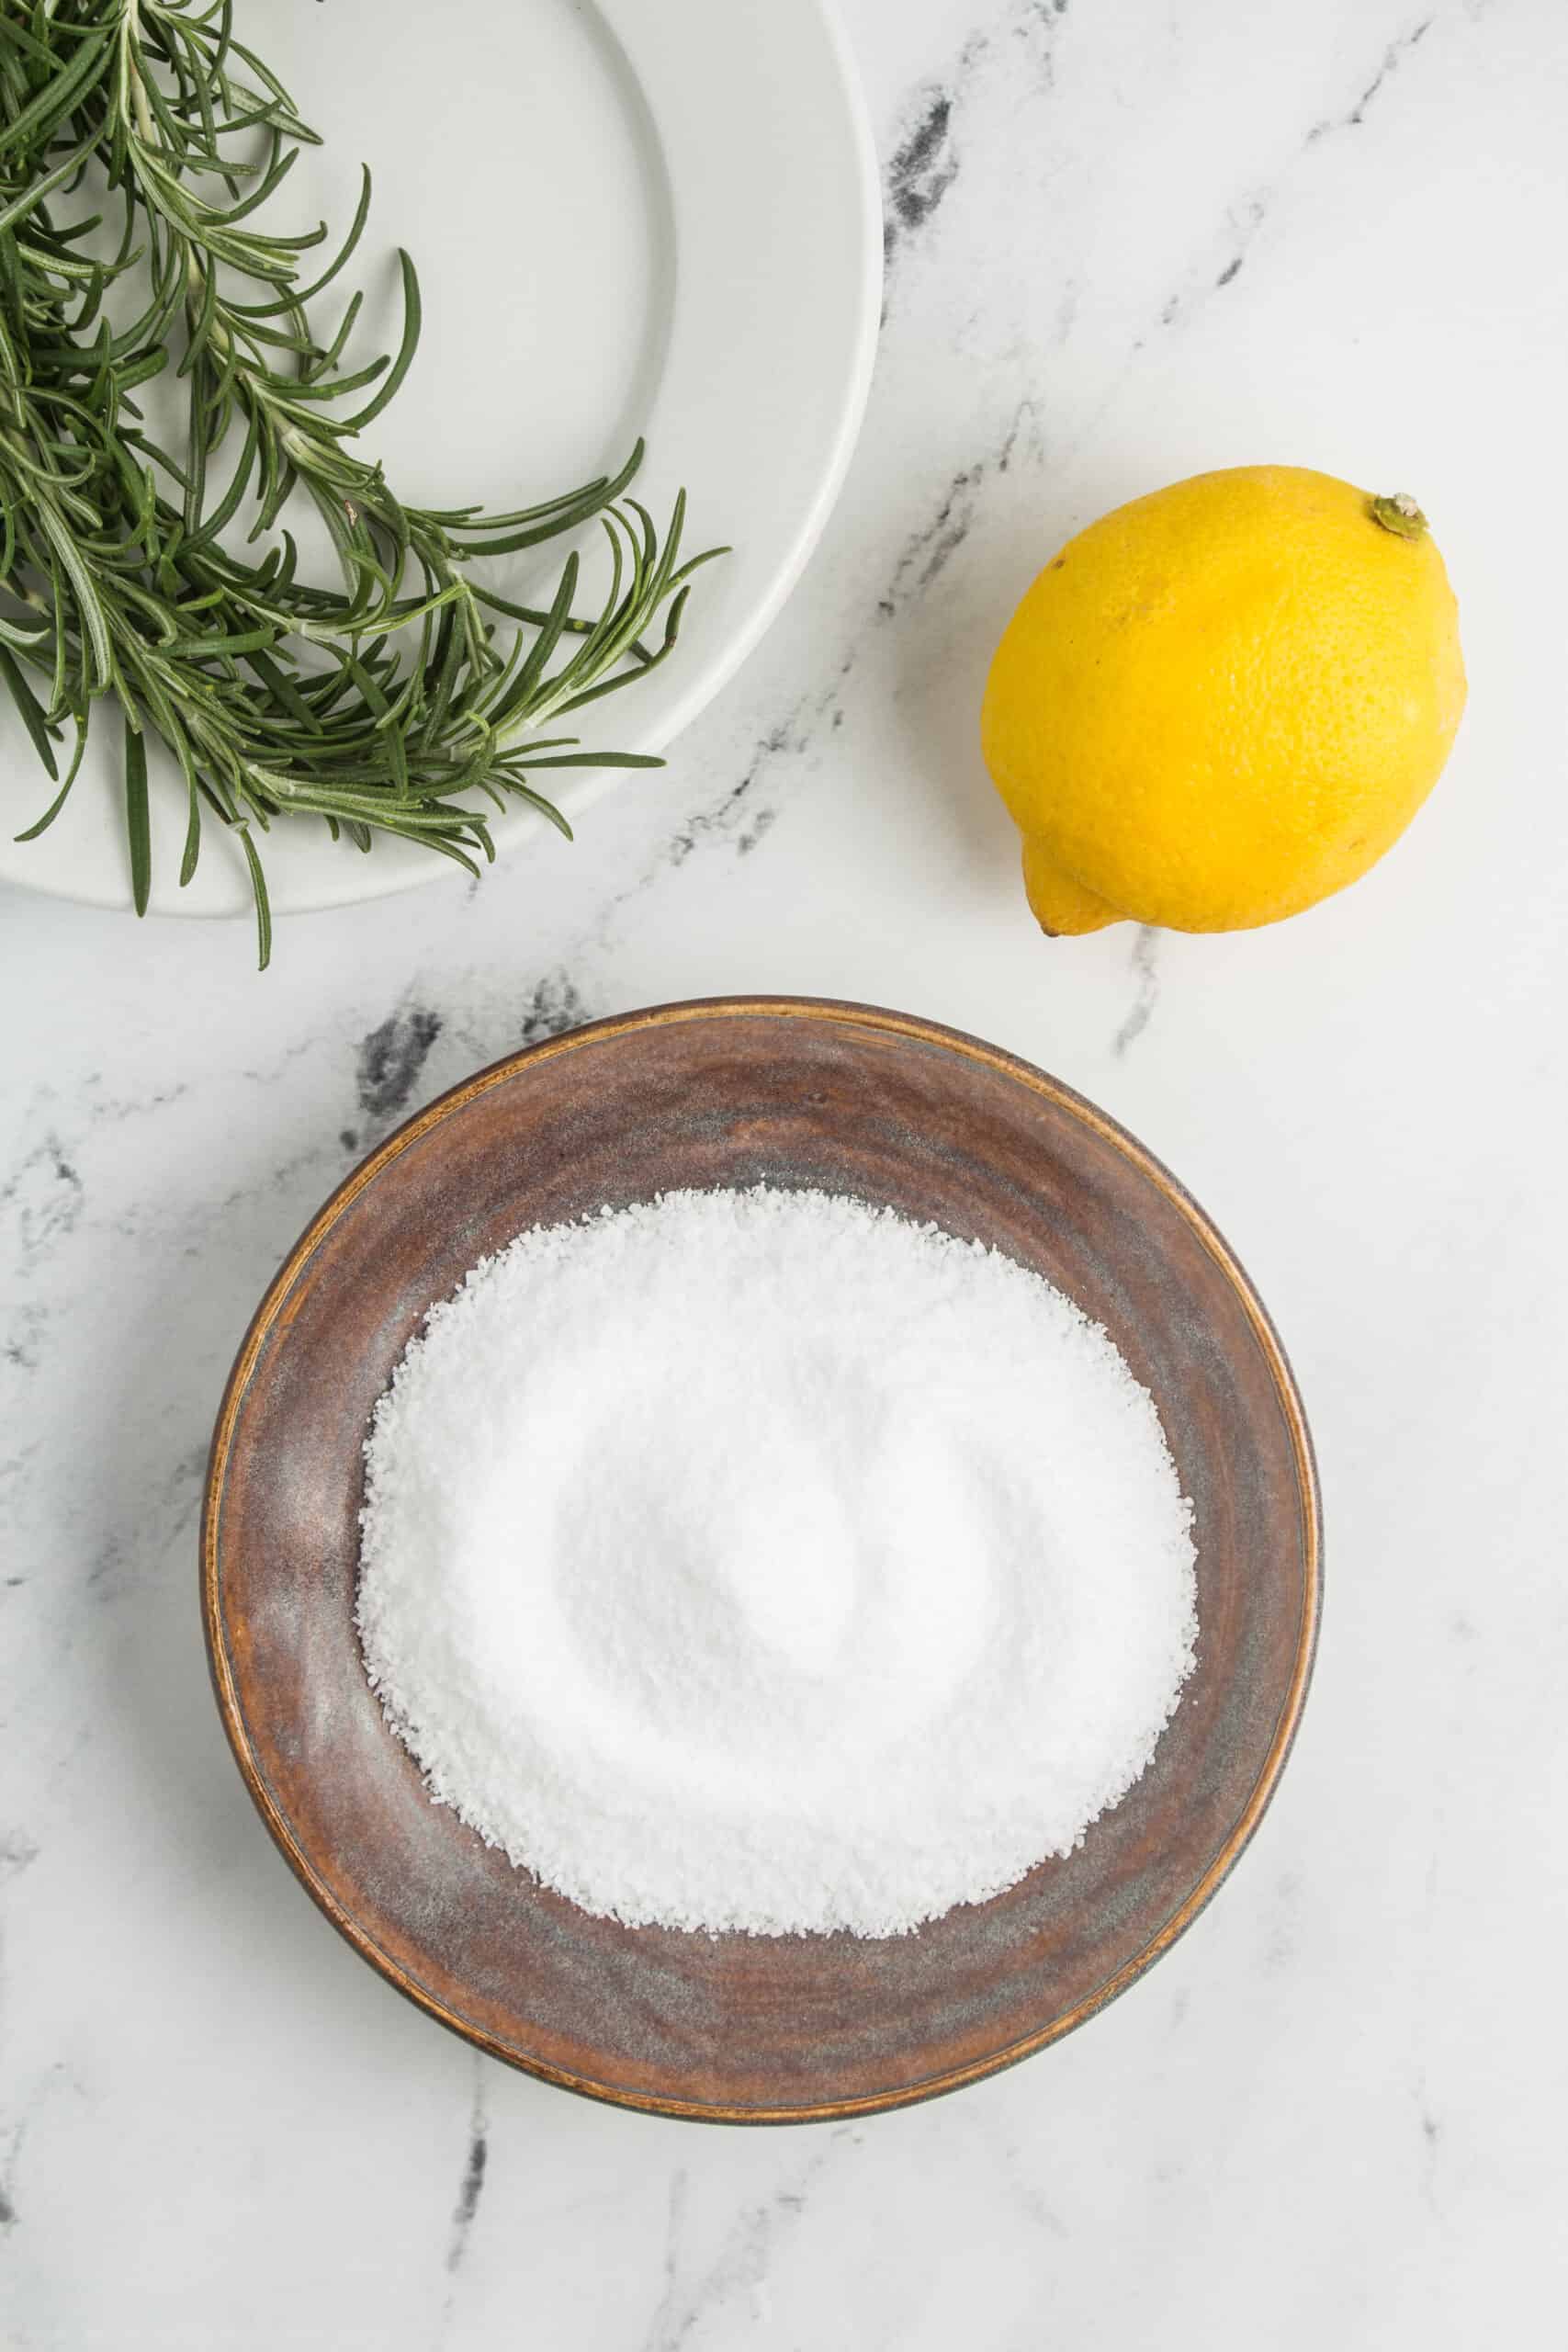 This ingredient shot features three key elements: salt, fresh rosemary, and a lemon. The salt is seen in a container, providing the base for the recipe. Next to it, a bunch of fresh rosemary sprigs is displayed, exuding a fragrant aroma. Lastly, a lemon is included, showcasing its bright and citrusy presence in the recipe.